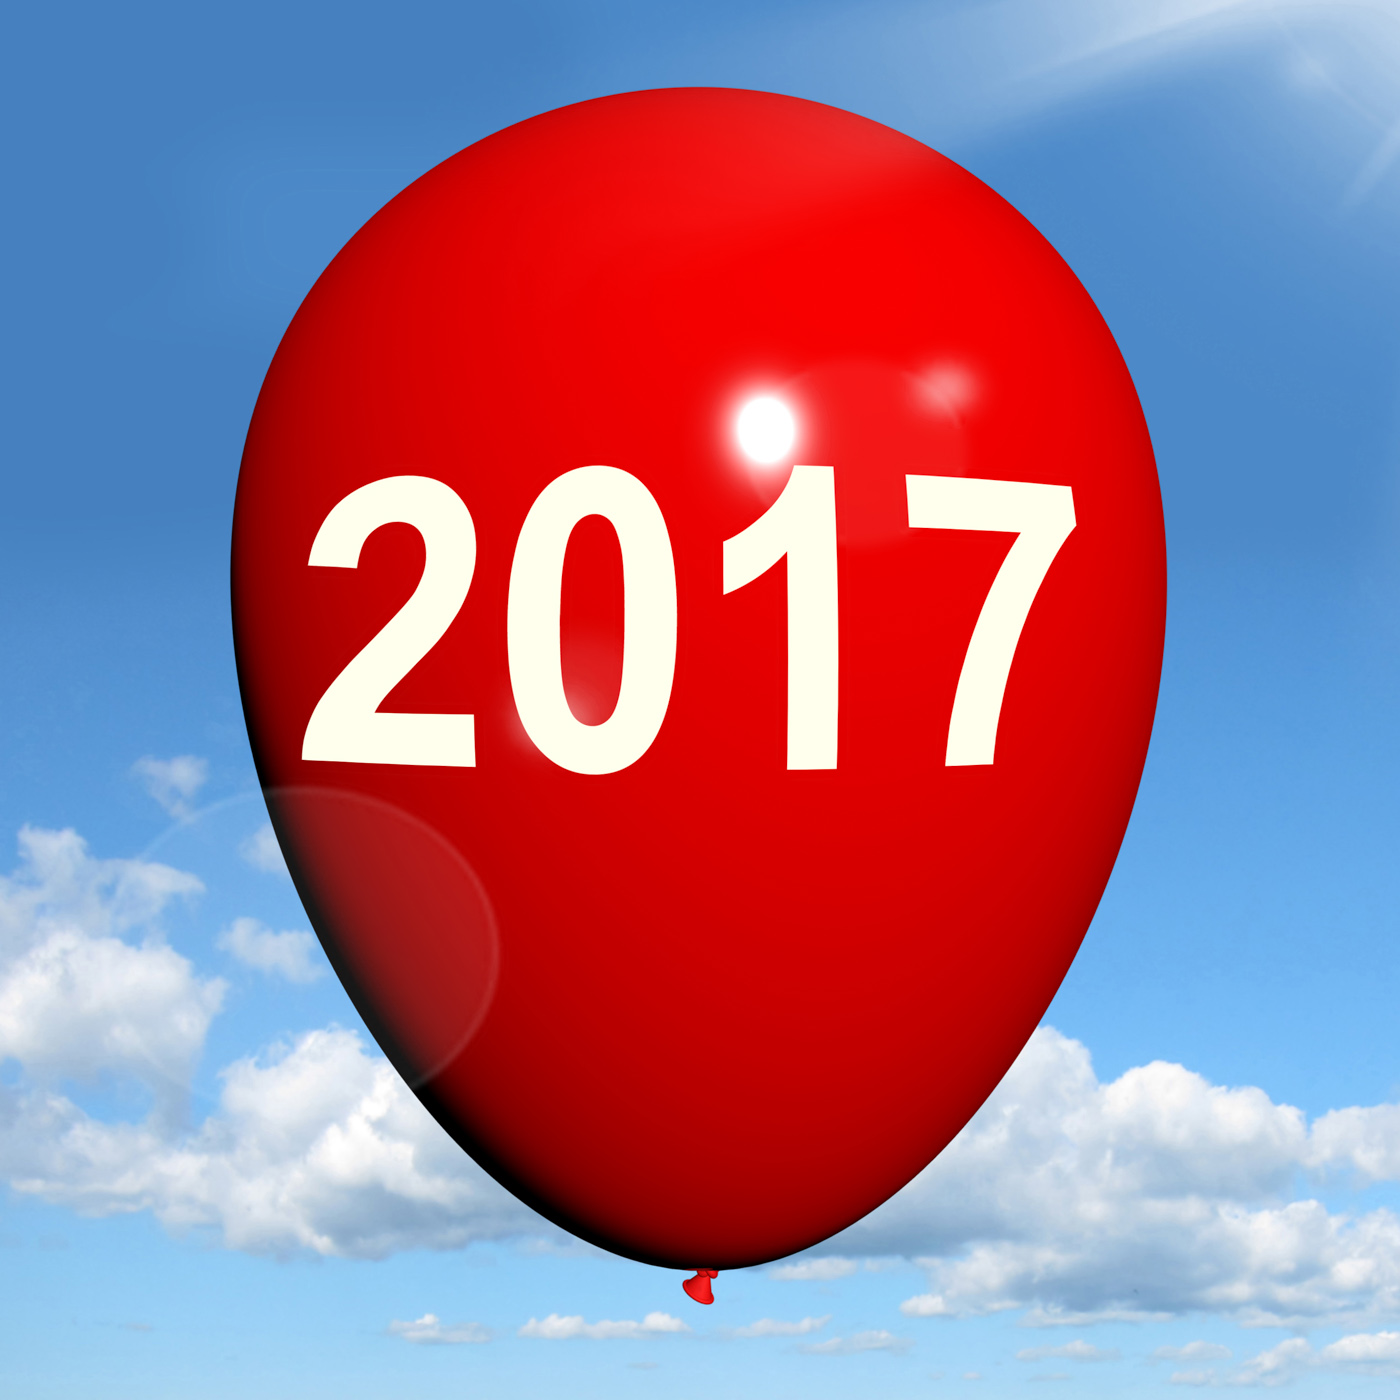 Two thousand seventeen on balloon shows year 2017 photo